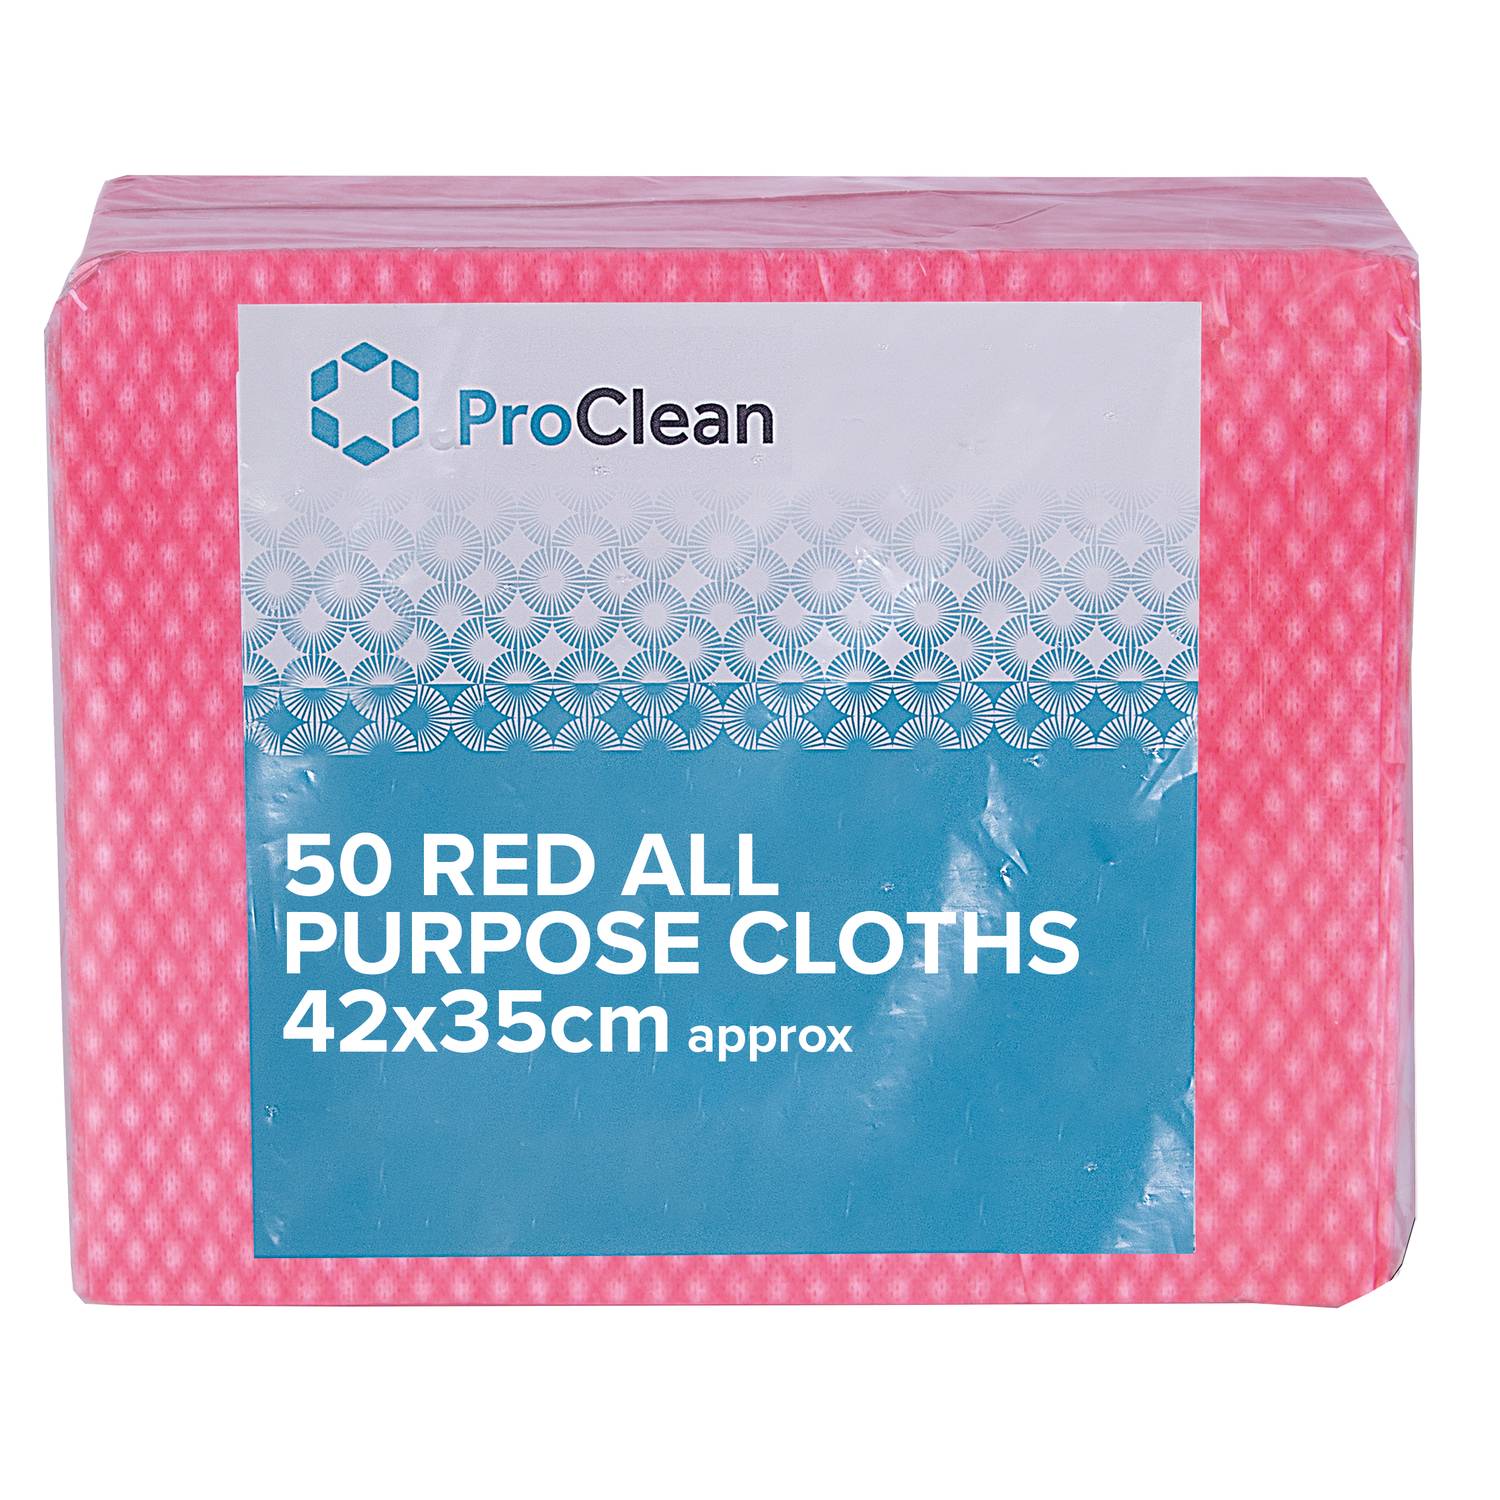 ProClean 50 All Purpose Cloths (Red) (20 x 50)